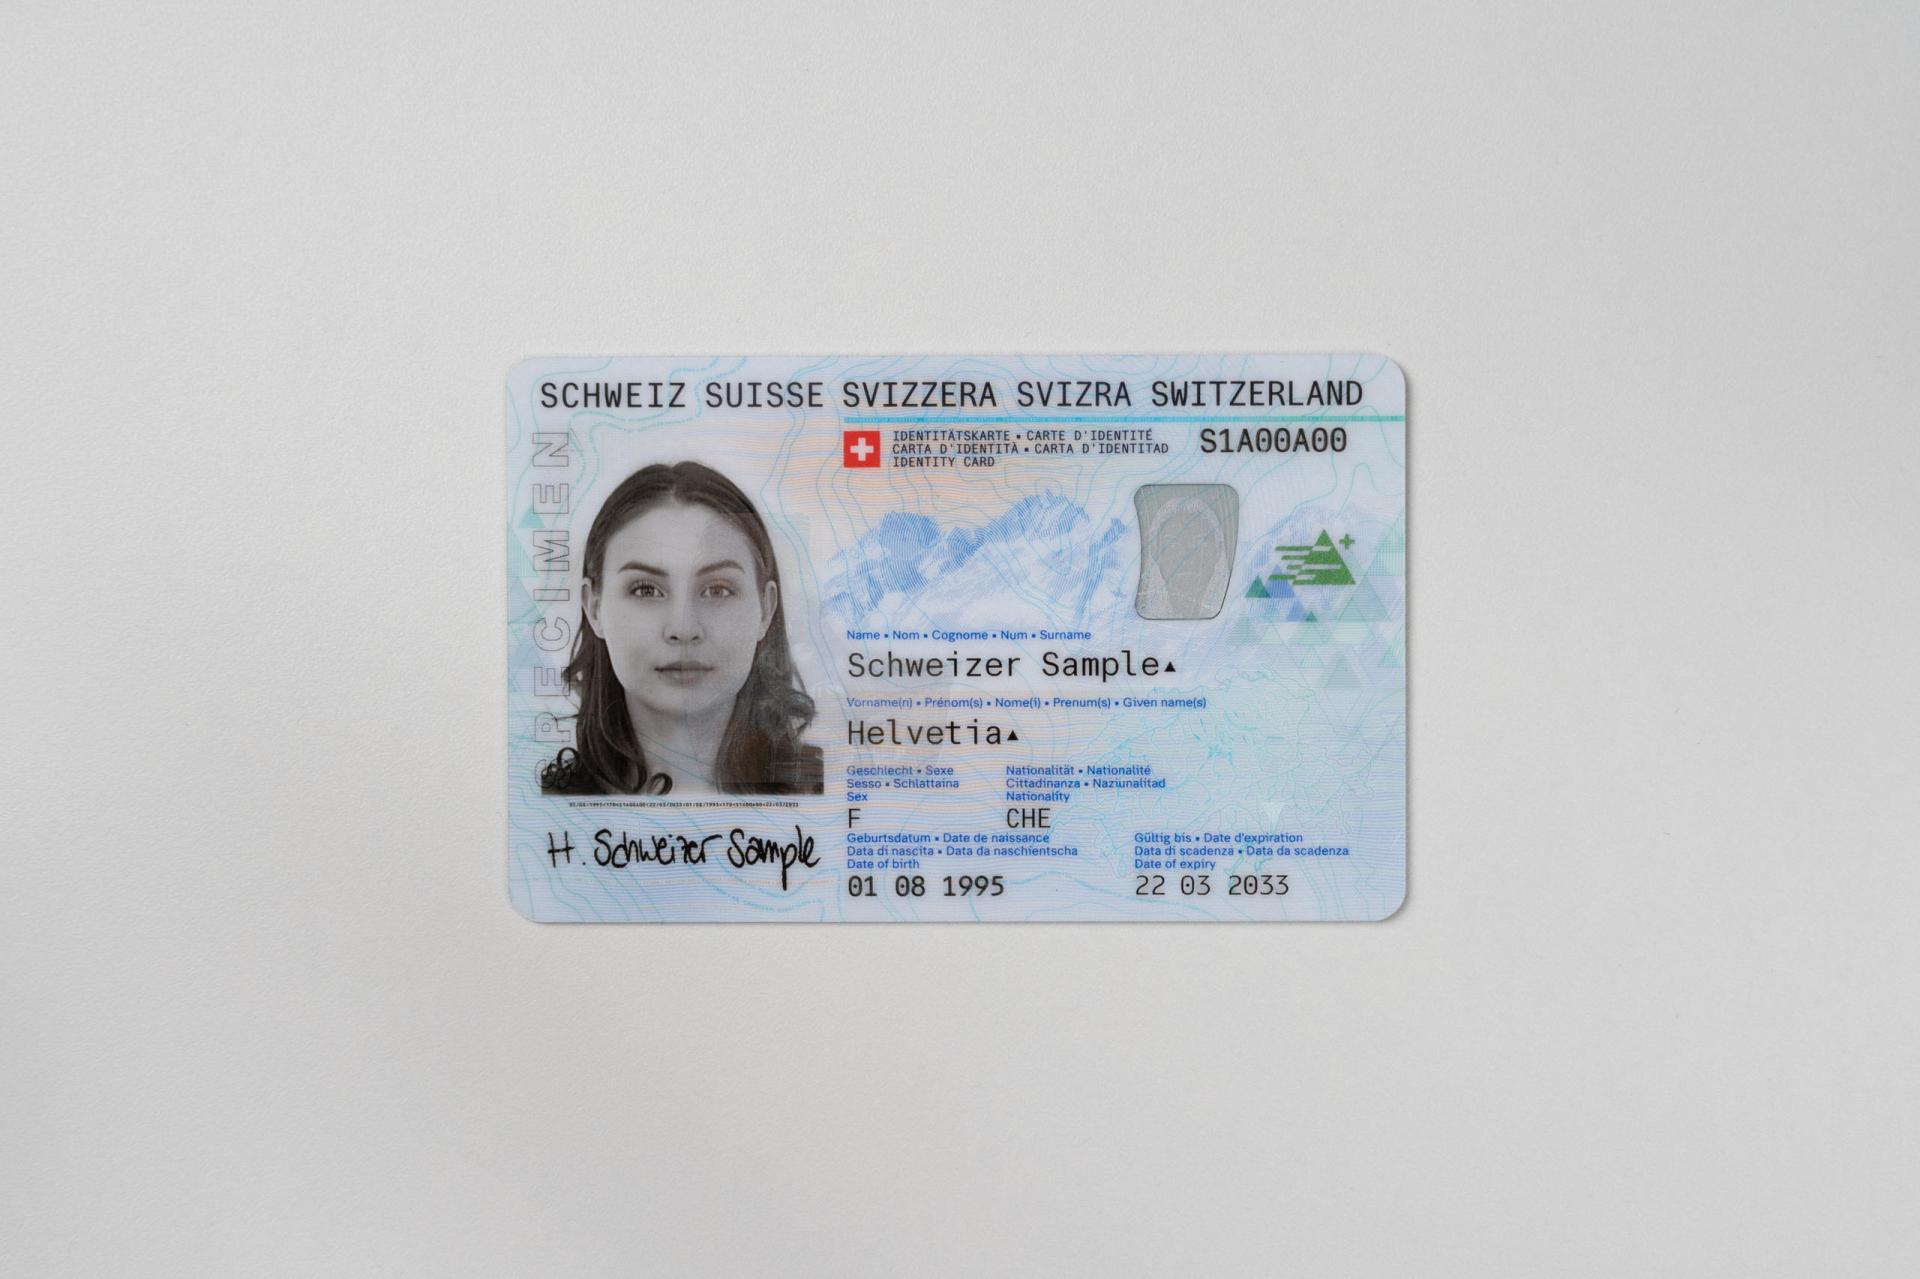 Swiss citizens to receive 'state-of-the-art' ID cards - SWI